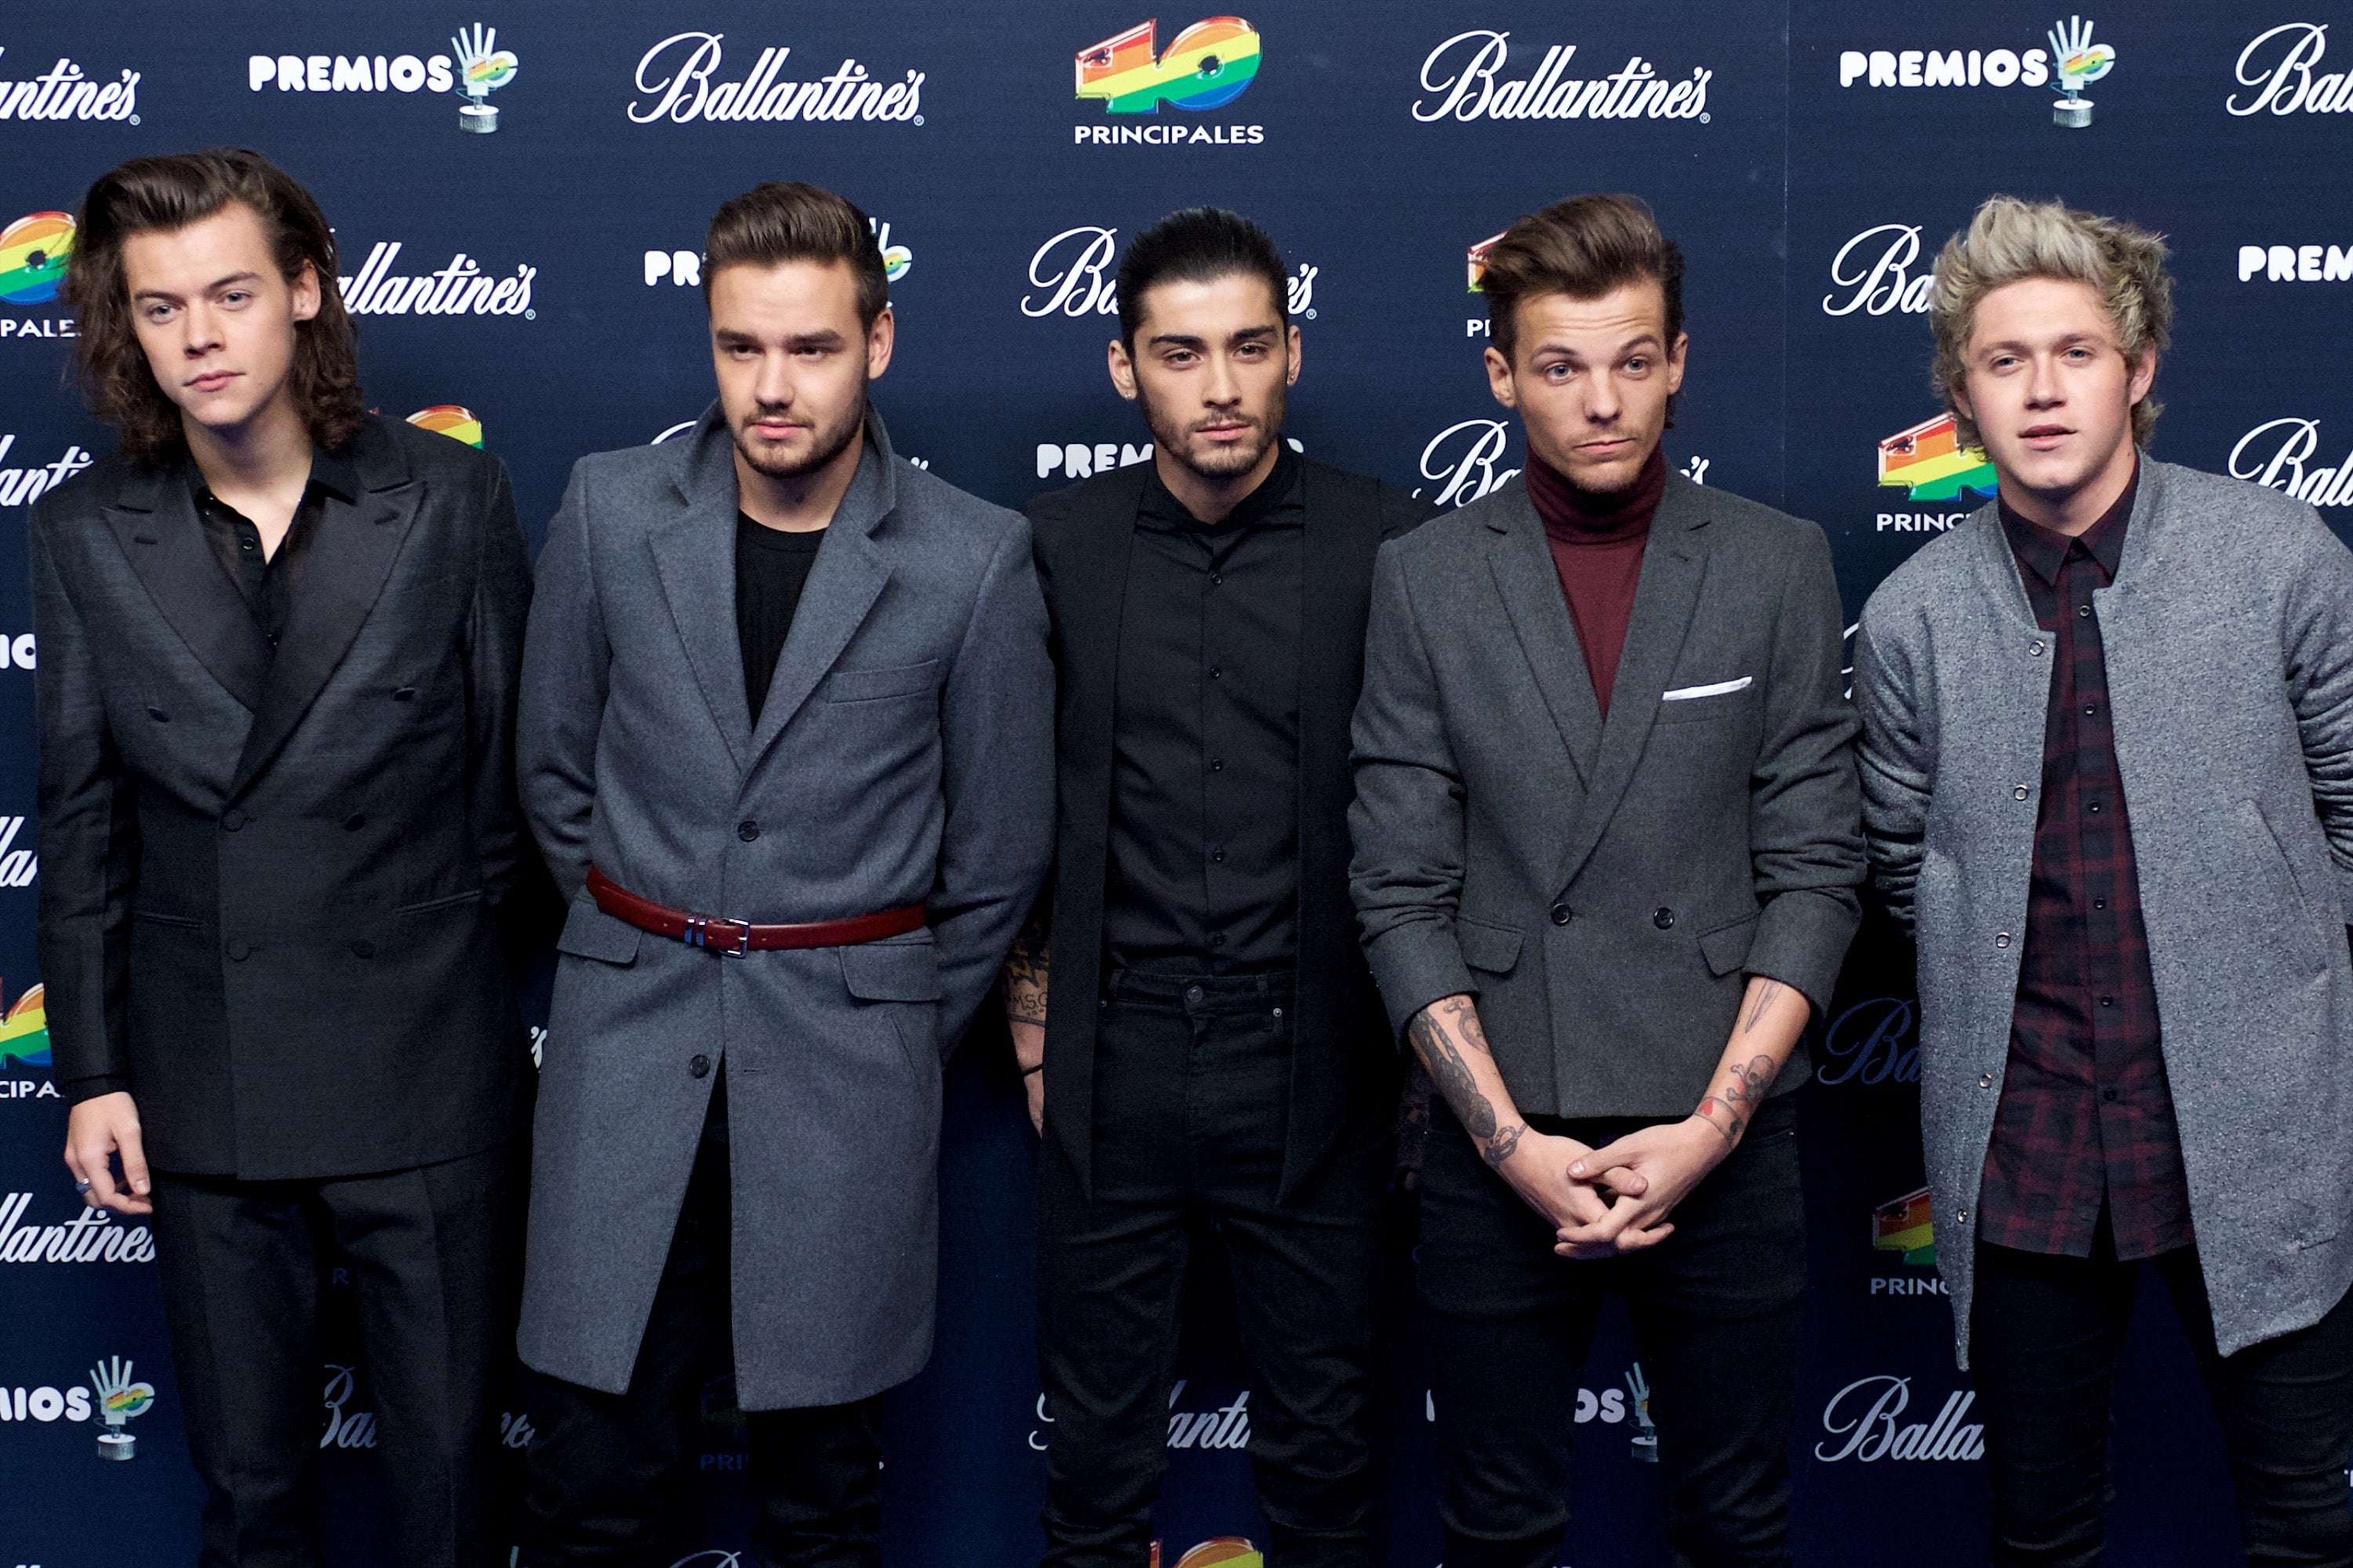 Harry Styles, Liam Payne, Zayn Malik, Louis Tomlinson and Niall Horan of One Direction attend the 40 Principales Awards photocall at the Barclaycard Center in 2014